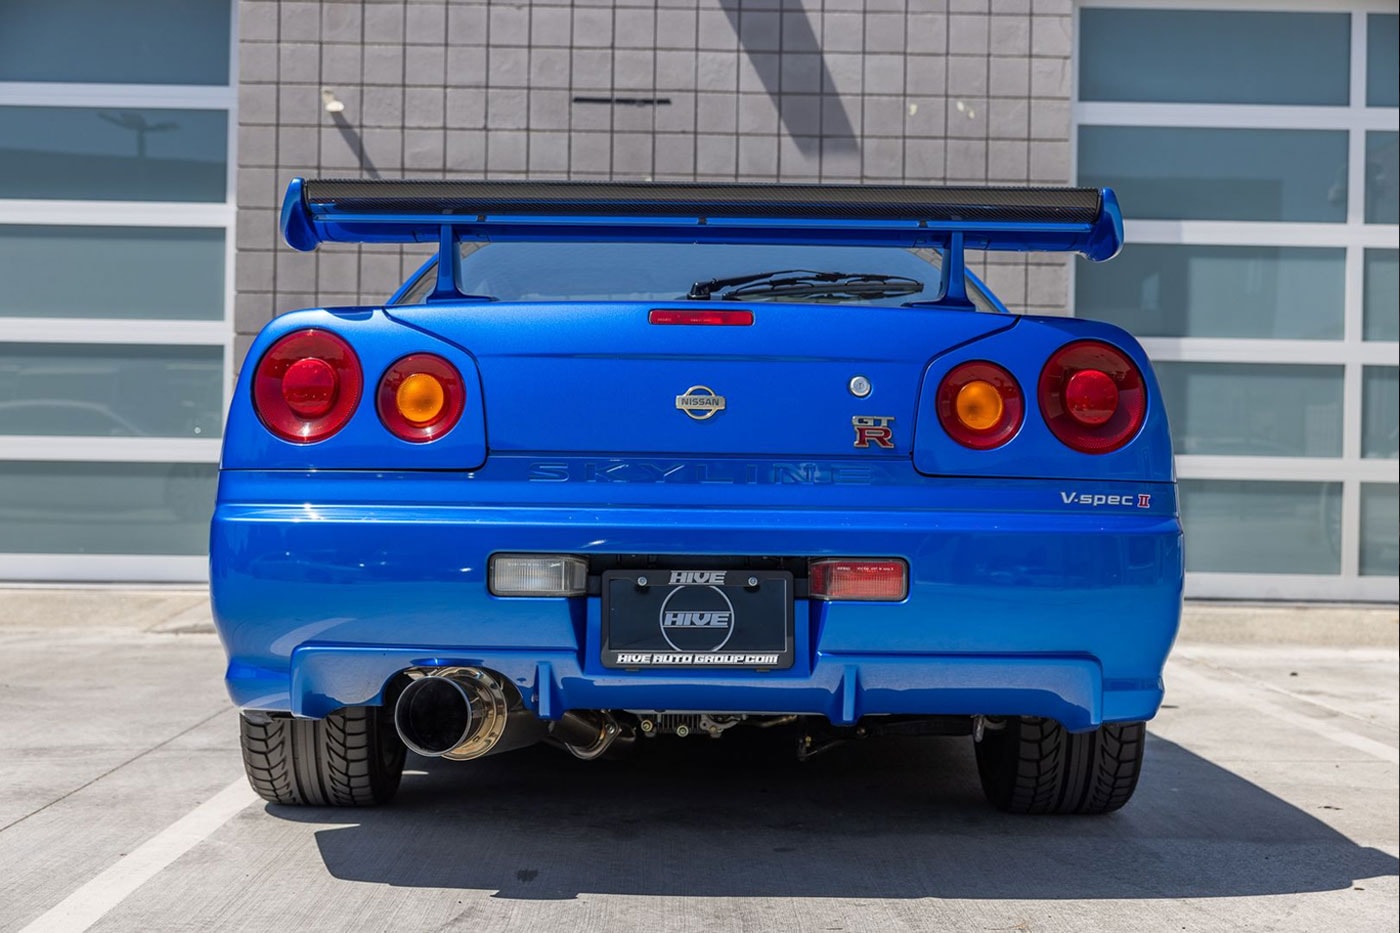 You Can Own an Iconic R34 Nissan Skyline GT-R V-Spec in the US